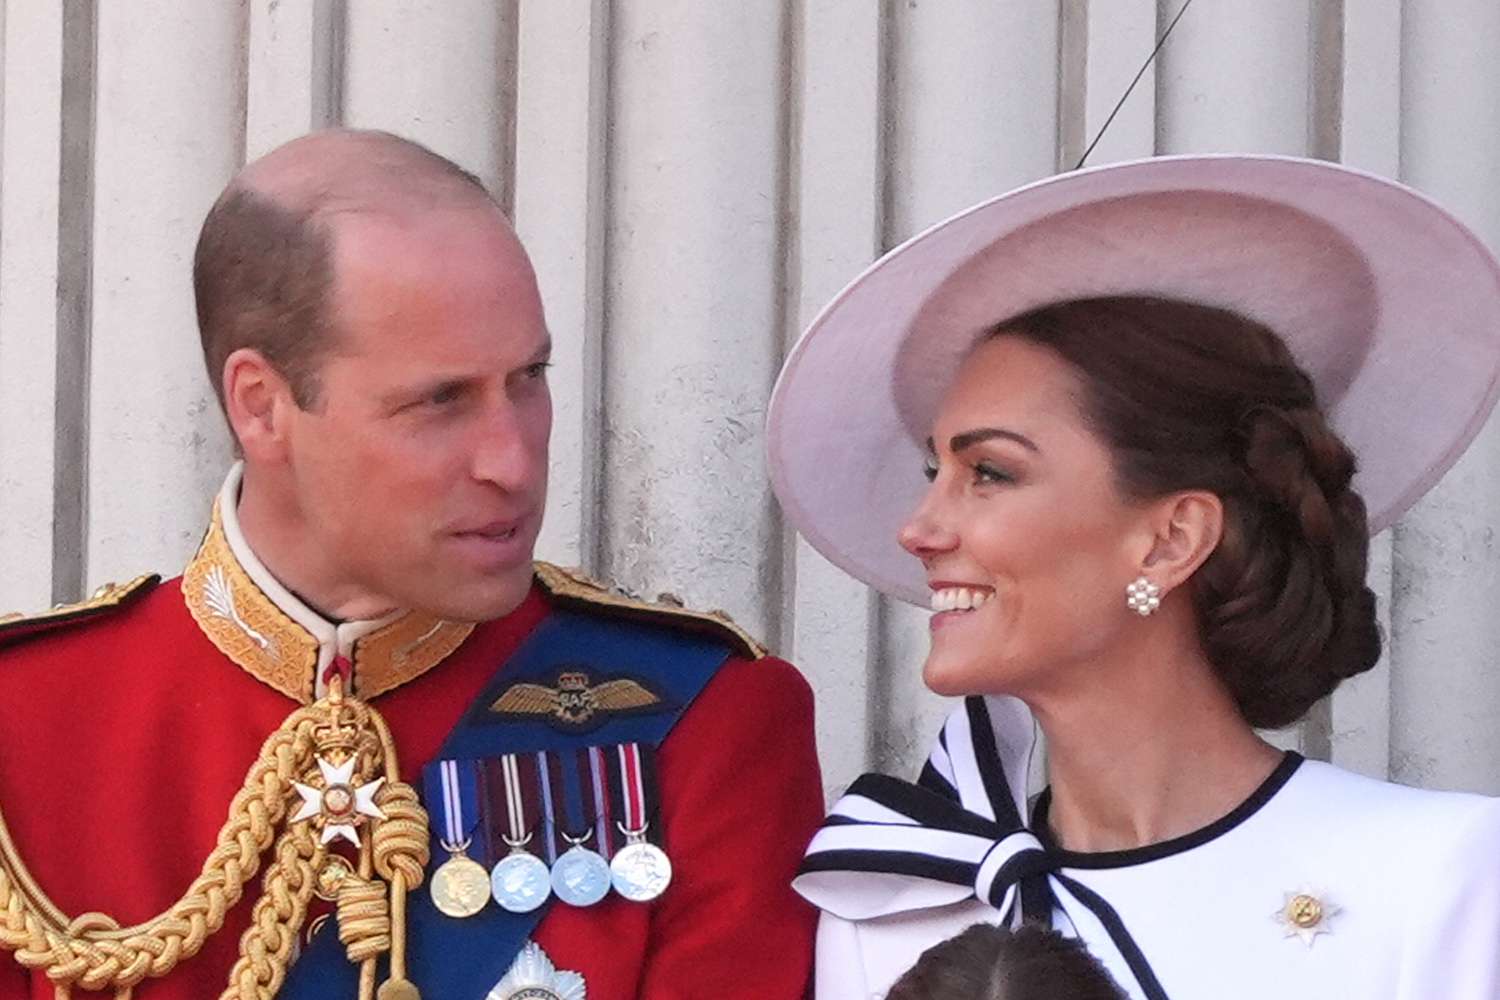 Kate Middleton Appears on Balcony at Trooping the Colour amid Cancer Treatment [Video]